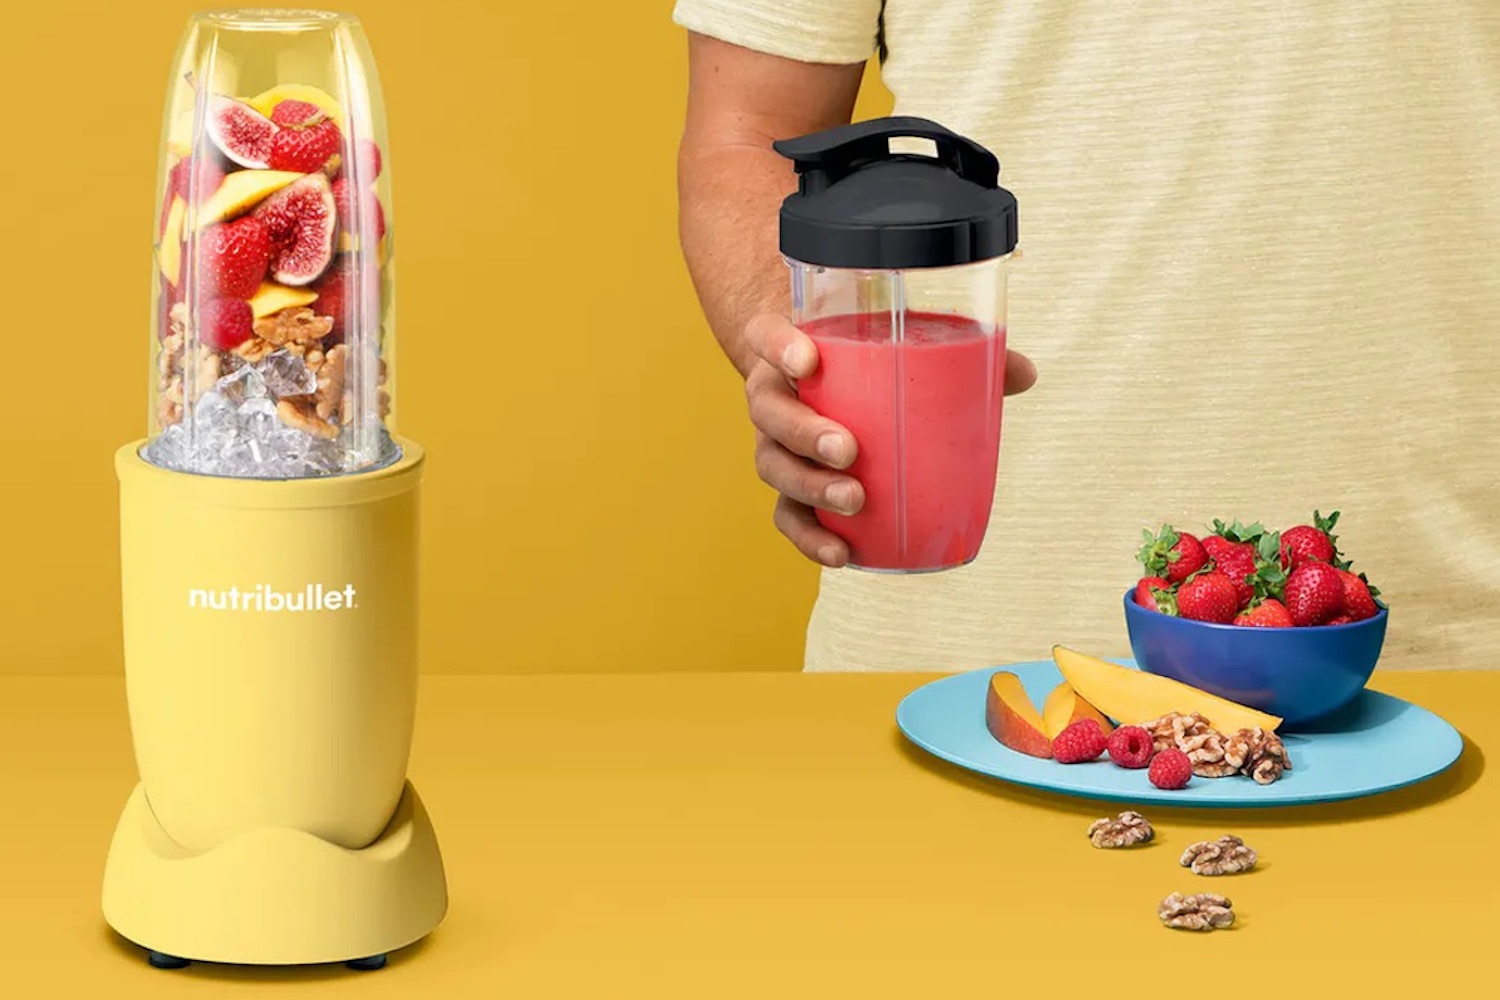 a yellow Nutribullet blender and a model with a plate of ingredients and smoothie on a yellow background